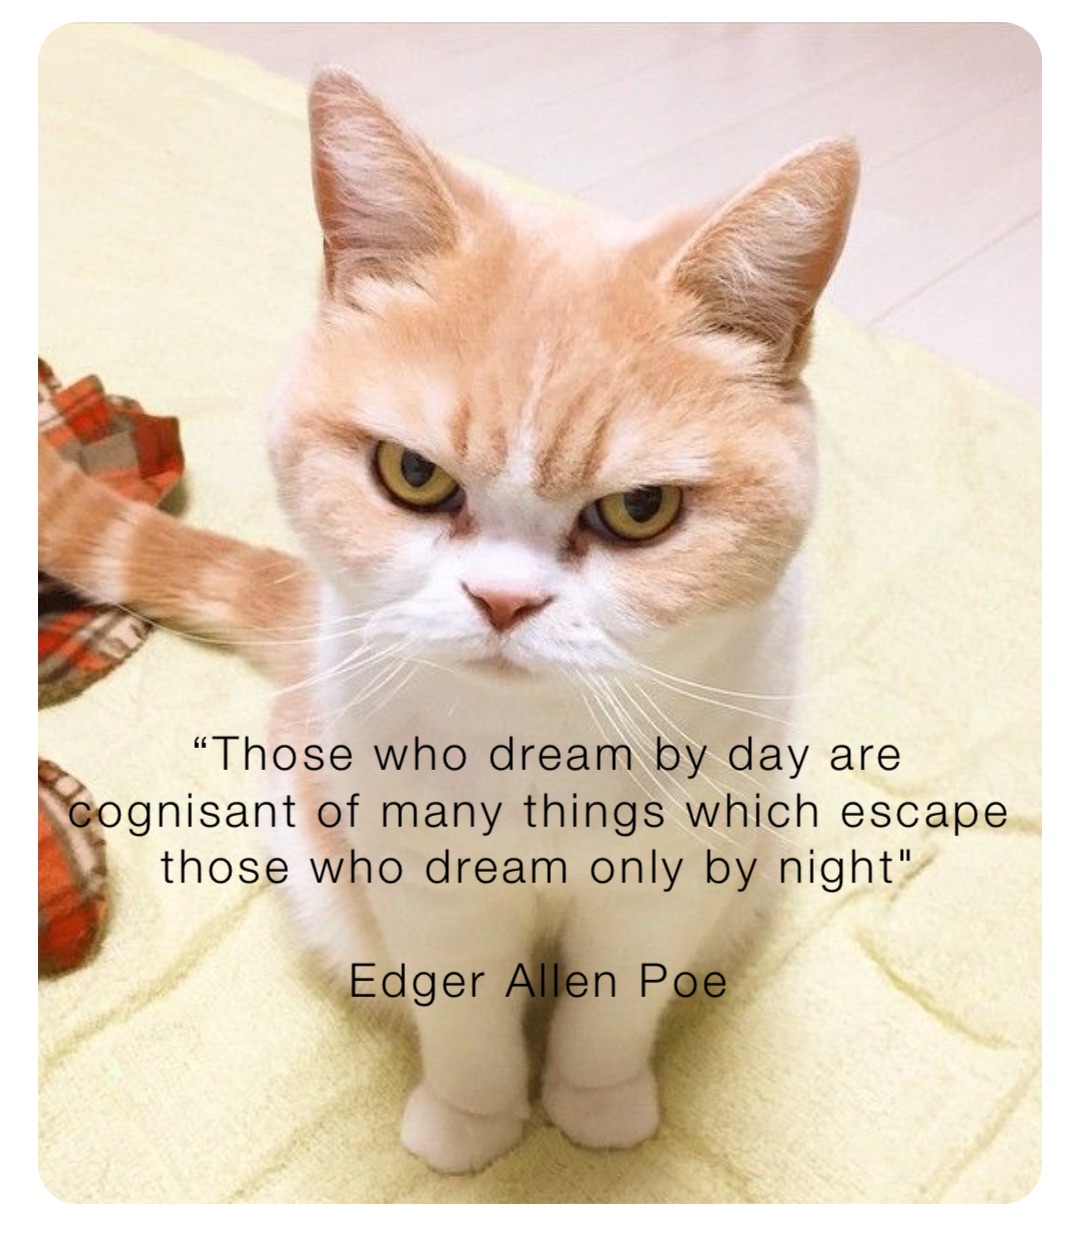 “Those who dream by day are cognisant of many things which escape those who dream only by night"

Edger Allen Poe